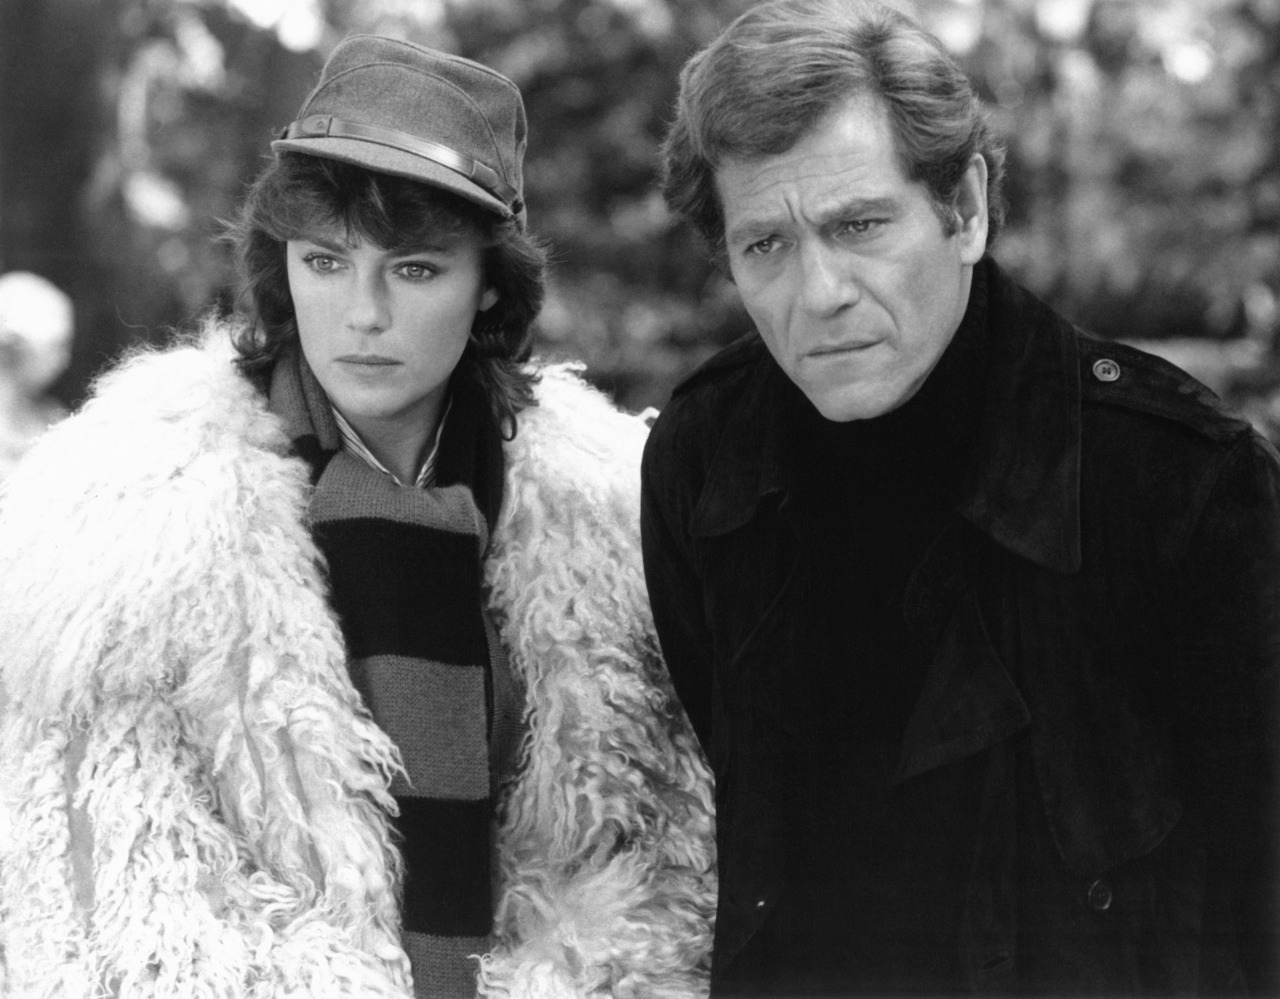 WHO IS KILLING THE GREAT CHEFS OF EUROPE?, from left: Jacqueline Bisset, George Segal, 1978, ©